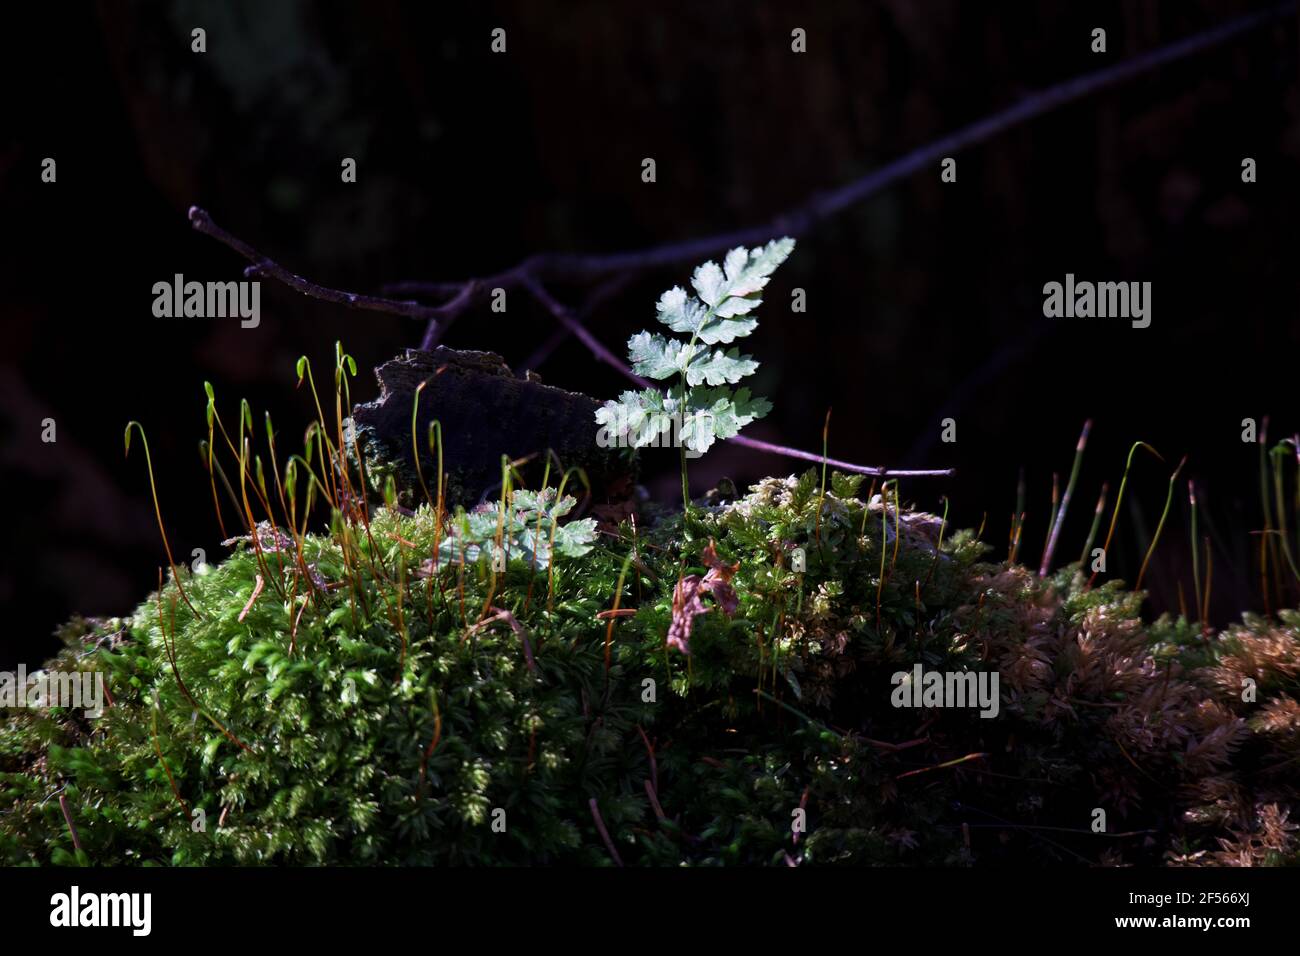 Tuft of blooming moss with reddish sporophytes neighbouring with a baby fern. A purple twig and a piece of tree bark is visible against the black b Stock Photo